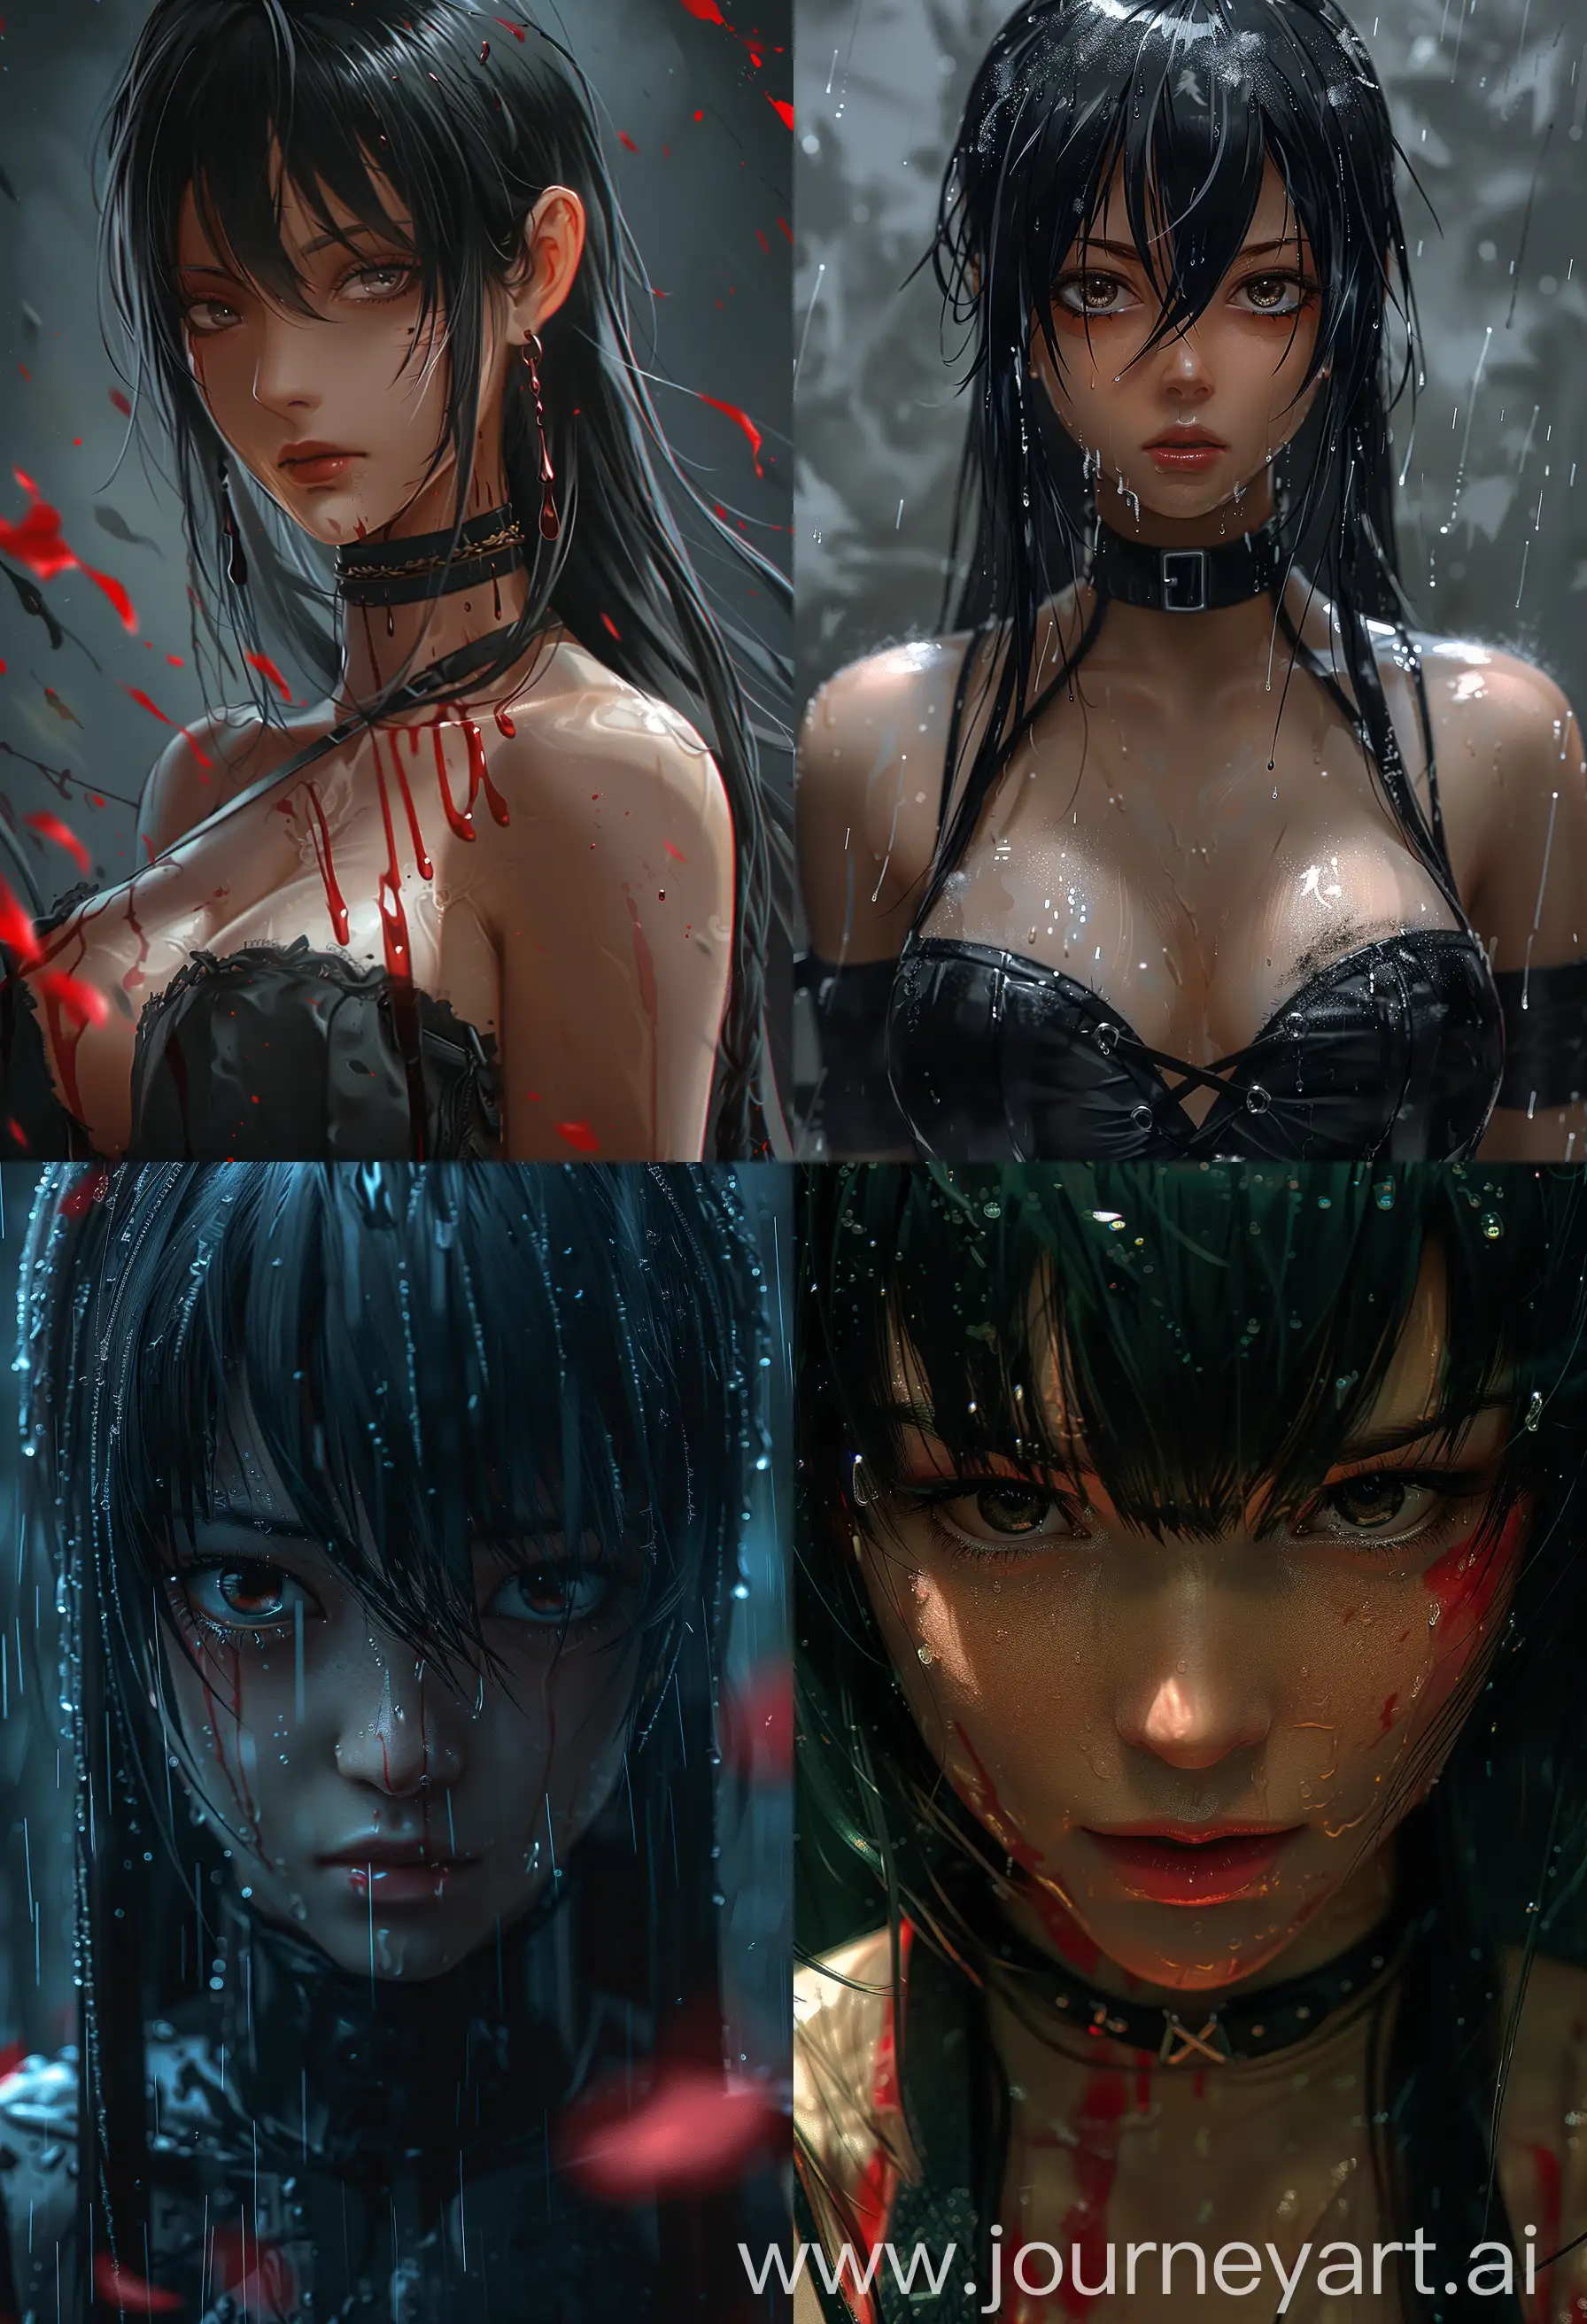 Realistic-4K-Akame-Ga-Kill-Anime-Character-in-Action